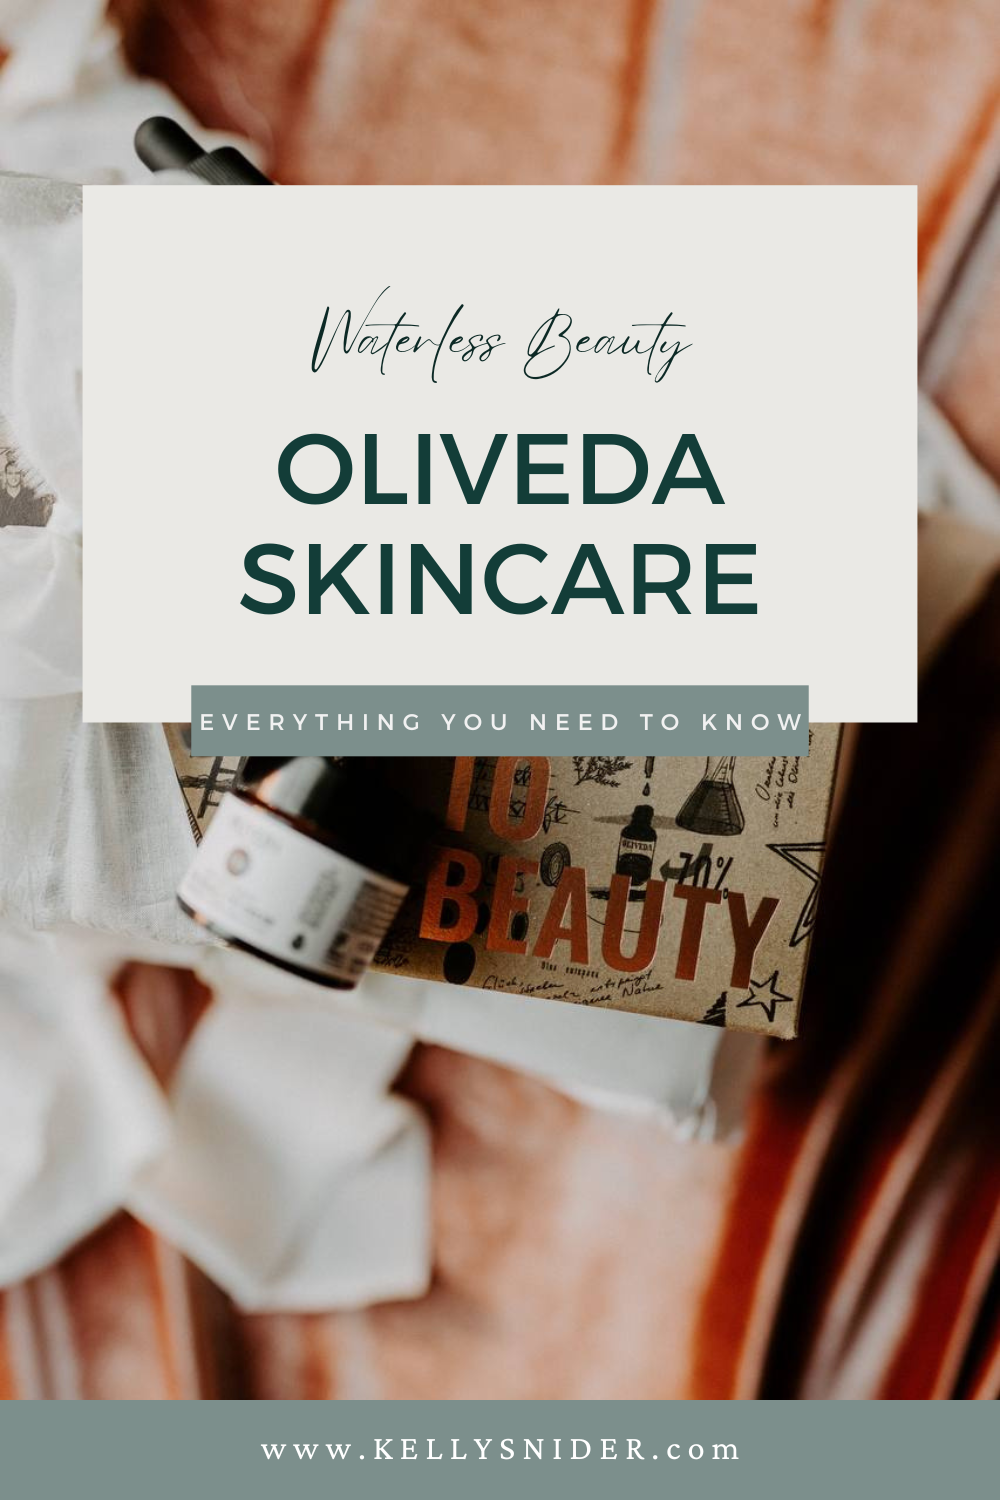 Oliveda Skincare The Secret To Transforming Your Skin Kelly Snider 7750